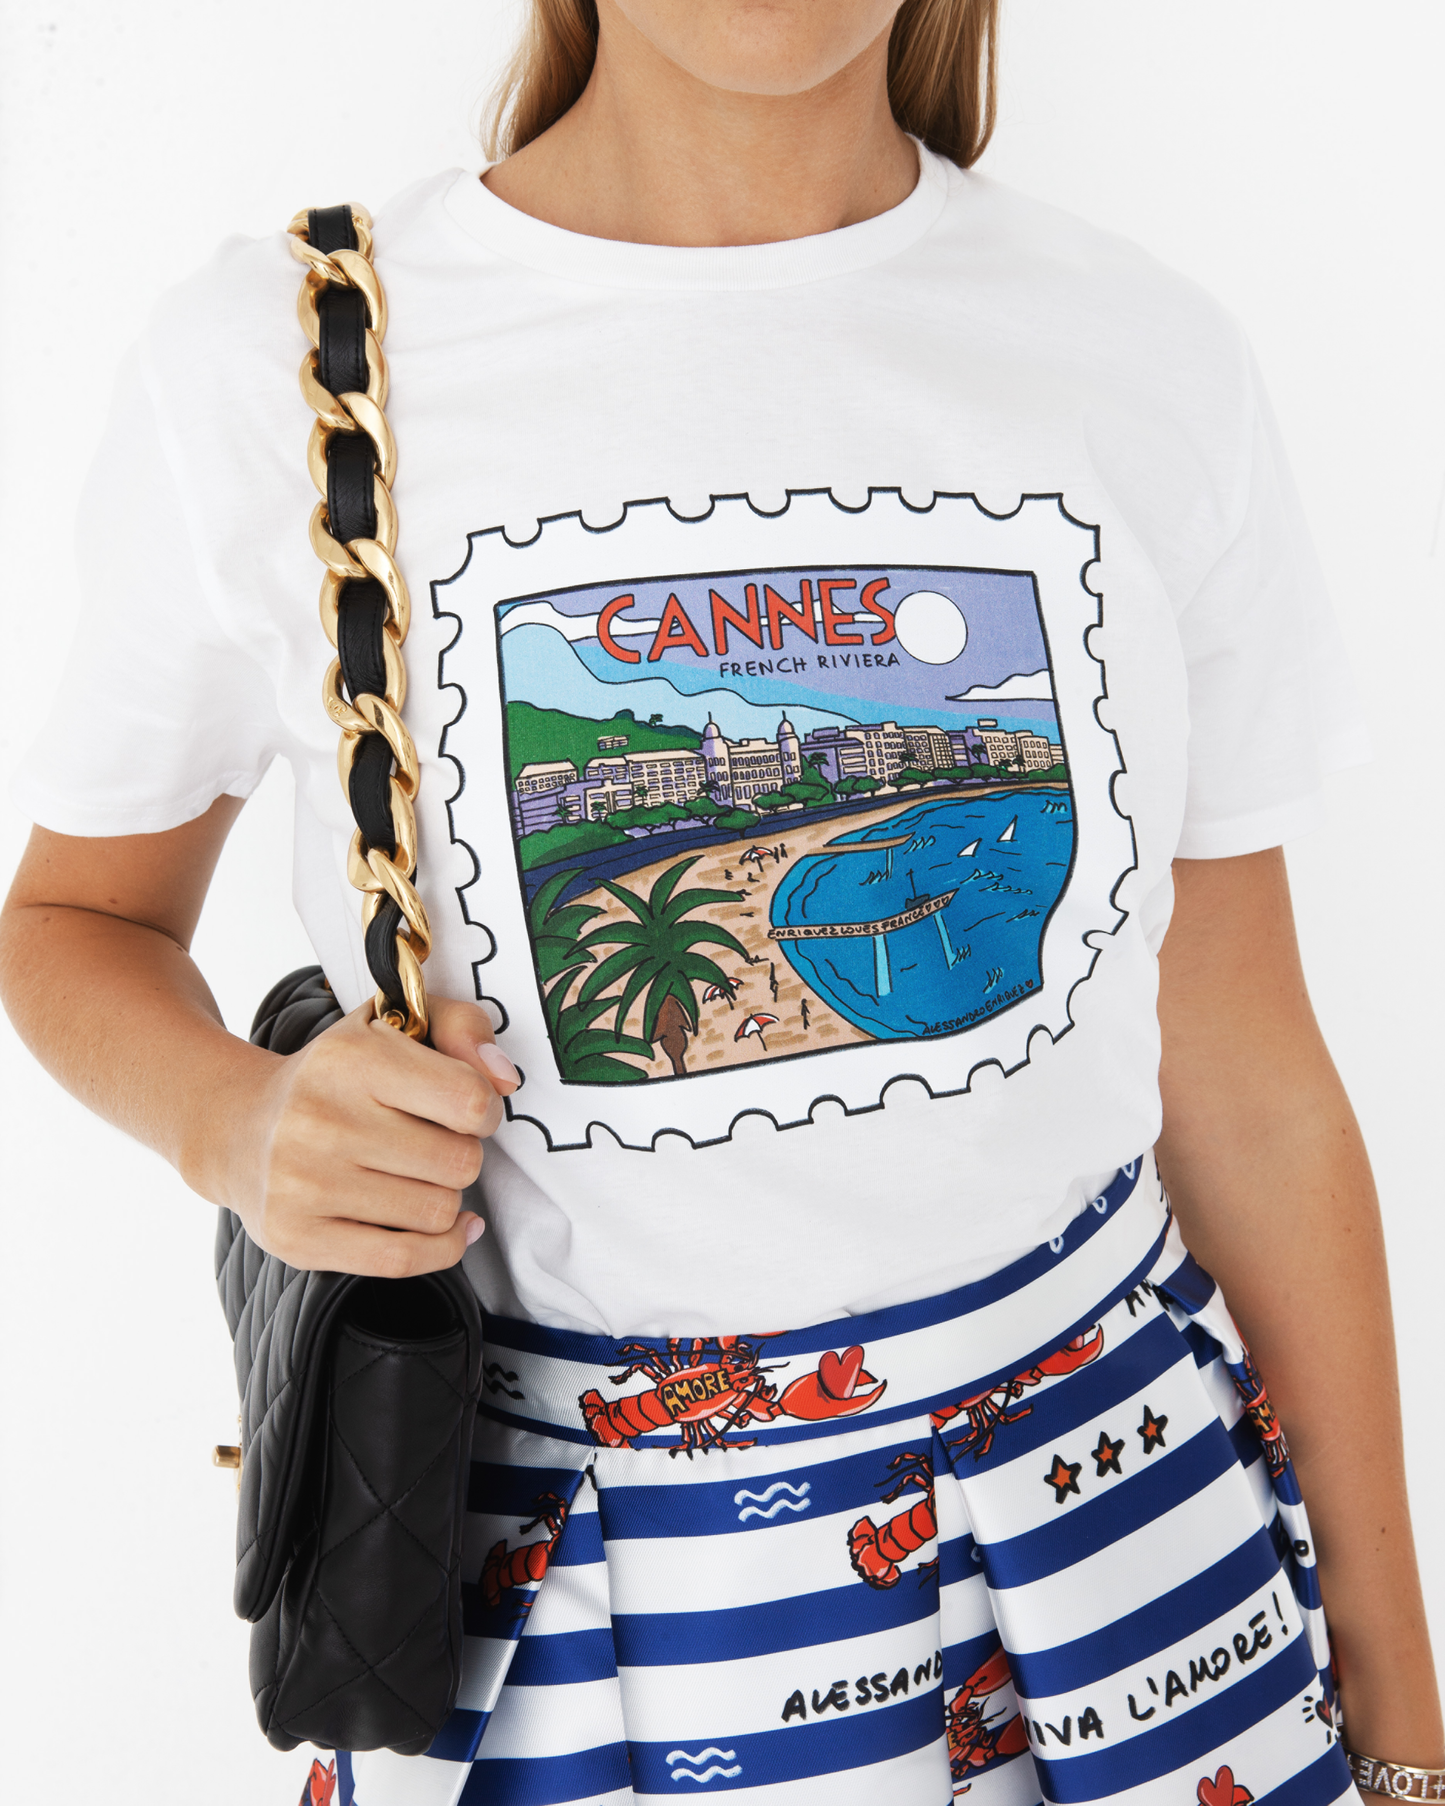 CANNES TOP - 20% Off